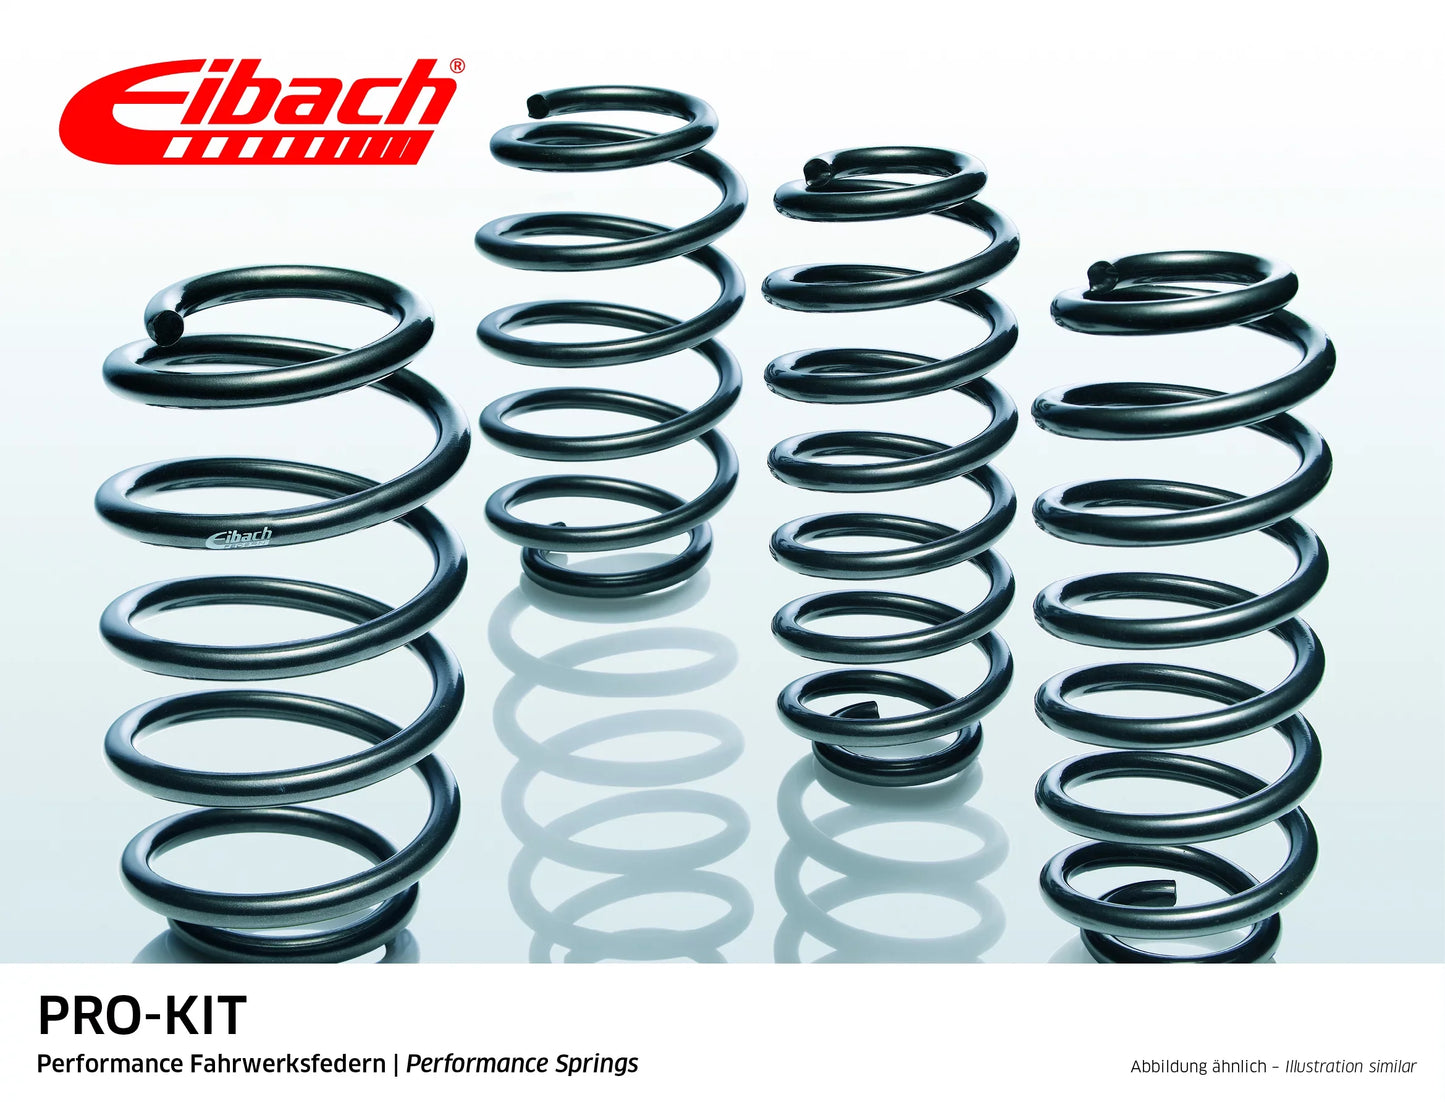 Eibach Pro-Kit Lowering Springs (E4040-140) at £270.84